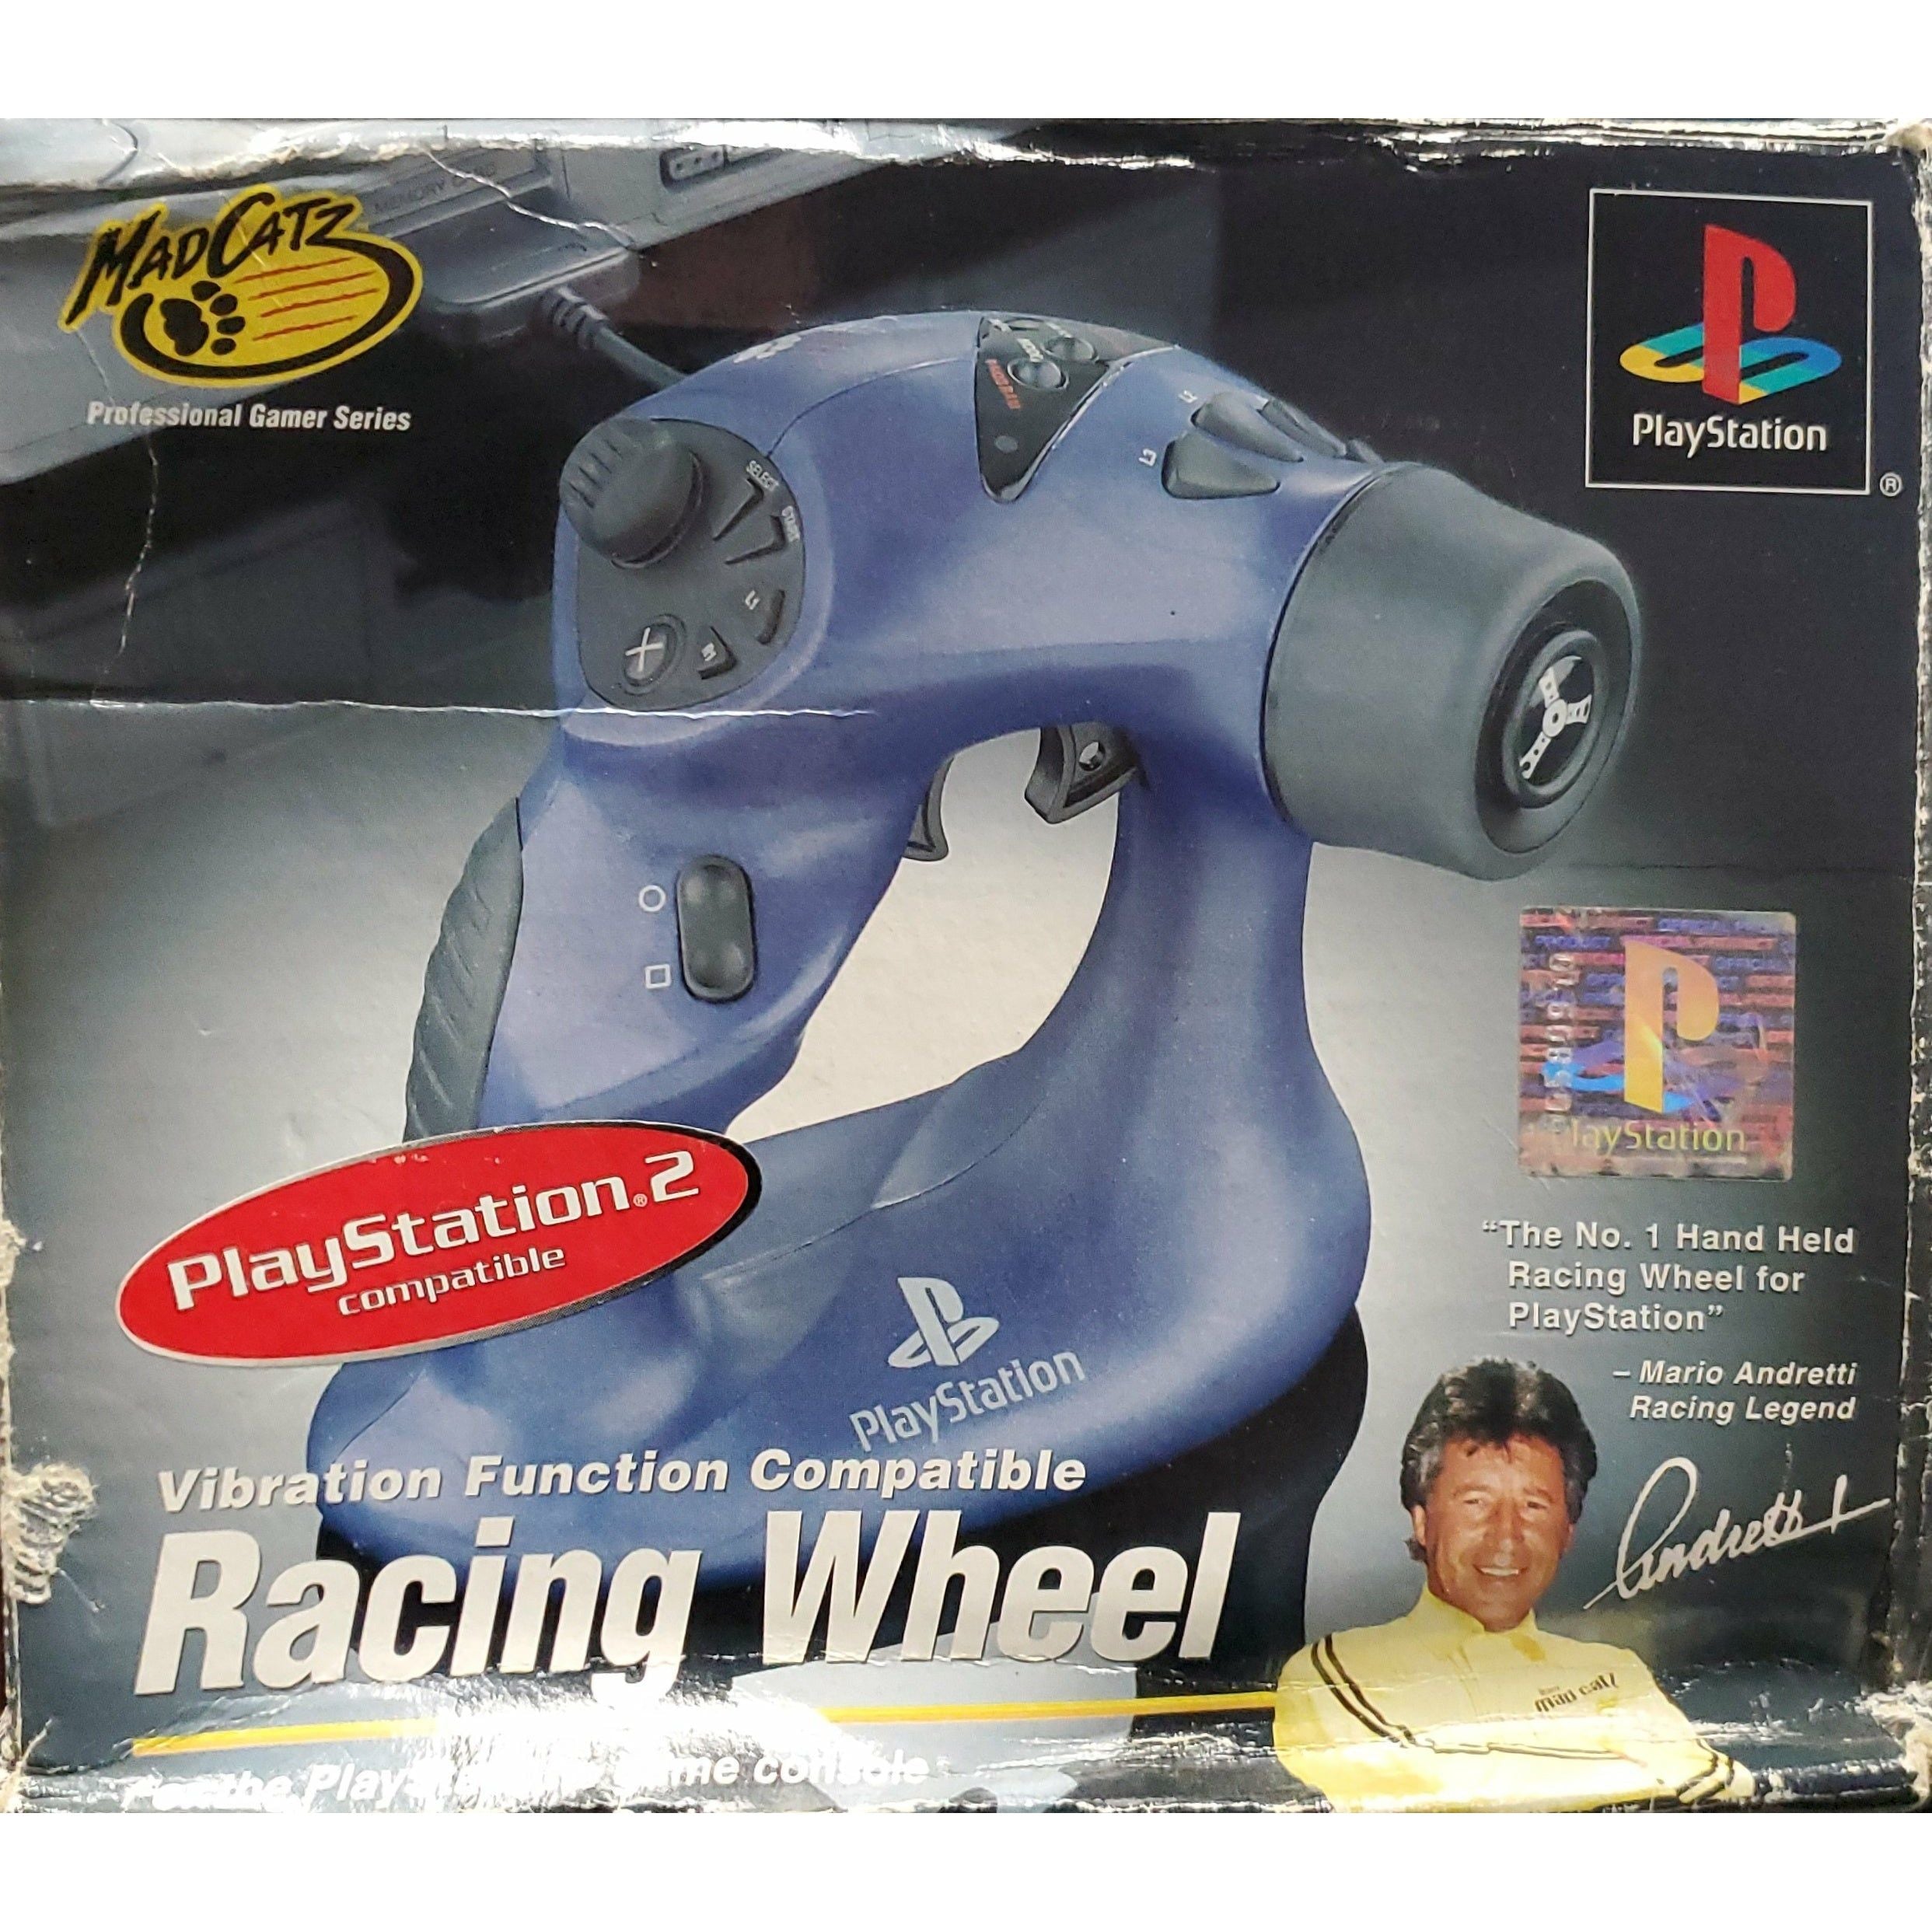 MadCatz Racing Wheel for the PlayStation